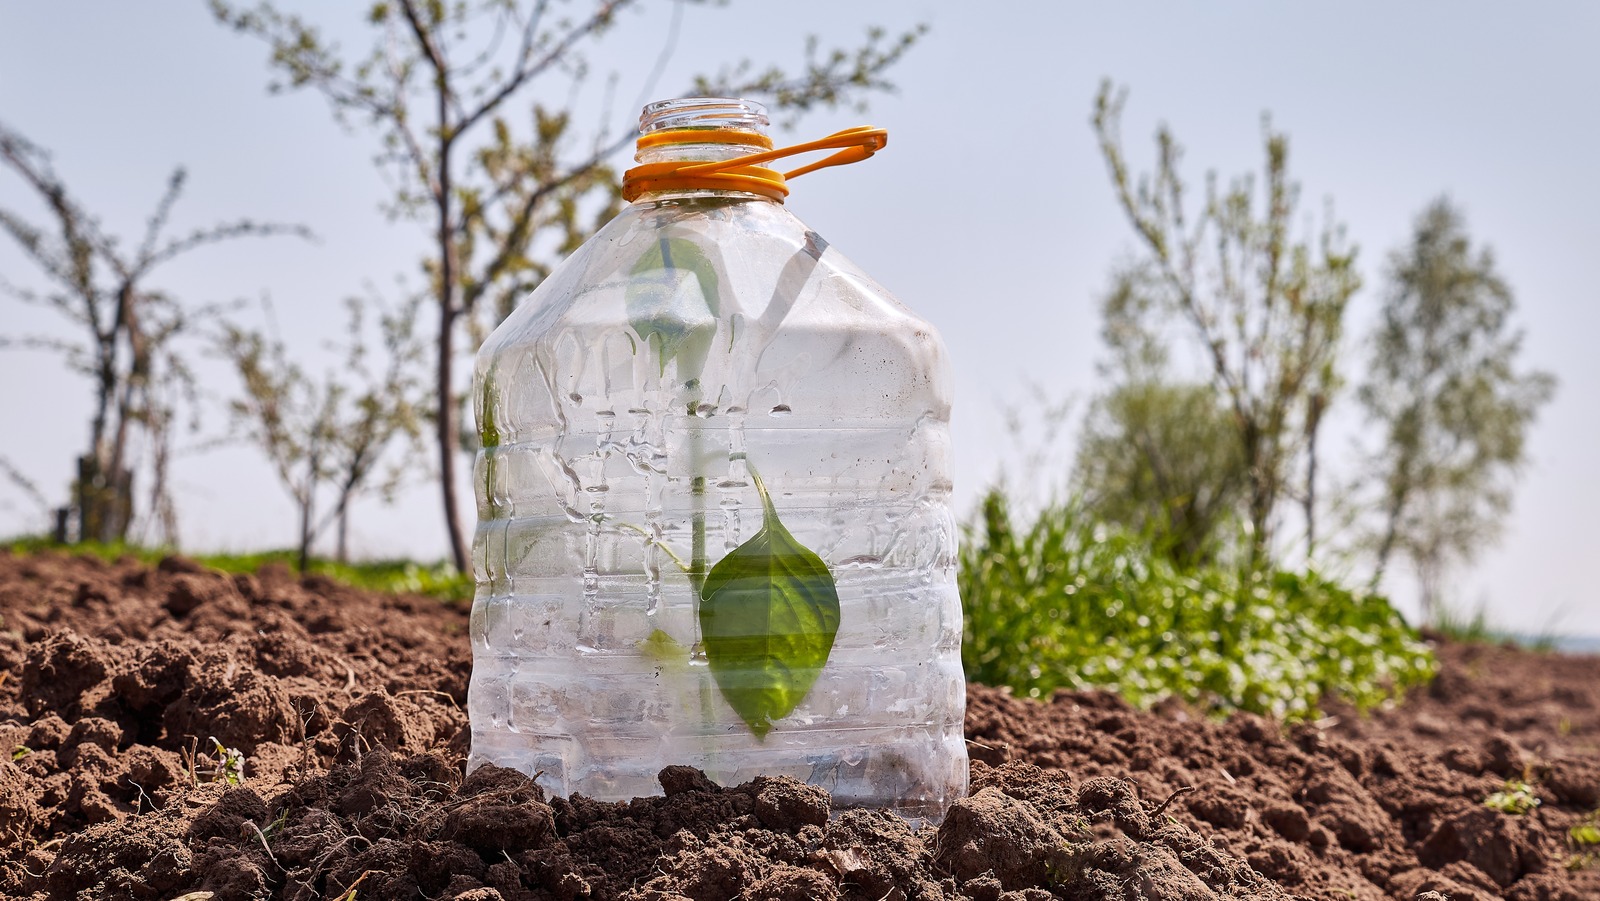 How Plastic Bottles Can Be Used To Protect Young Plants In Your Garden